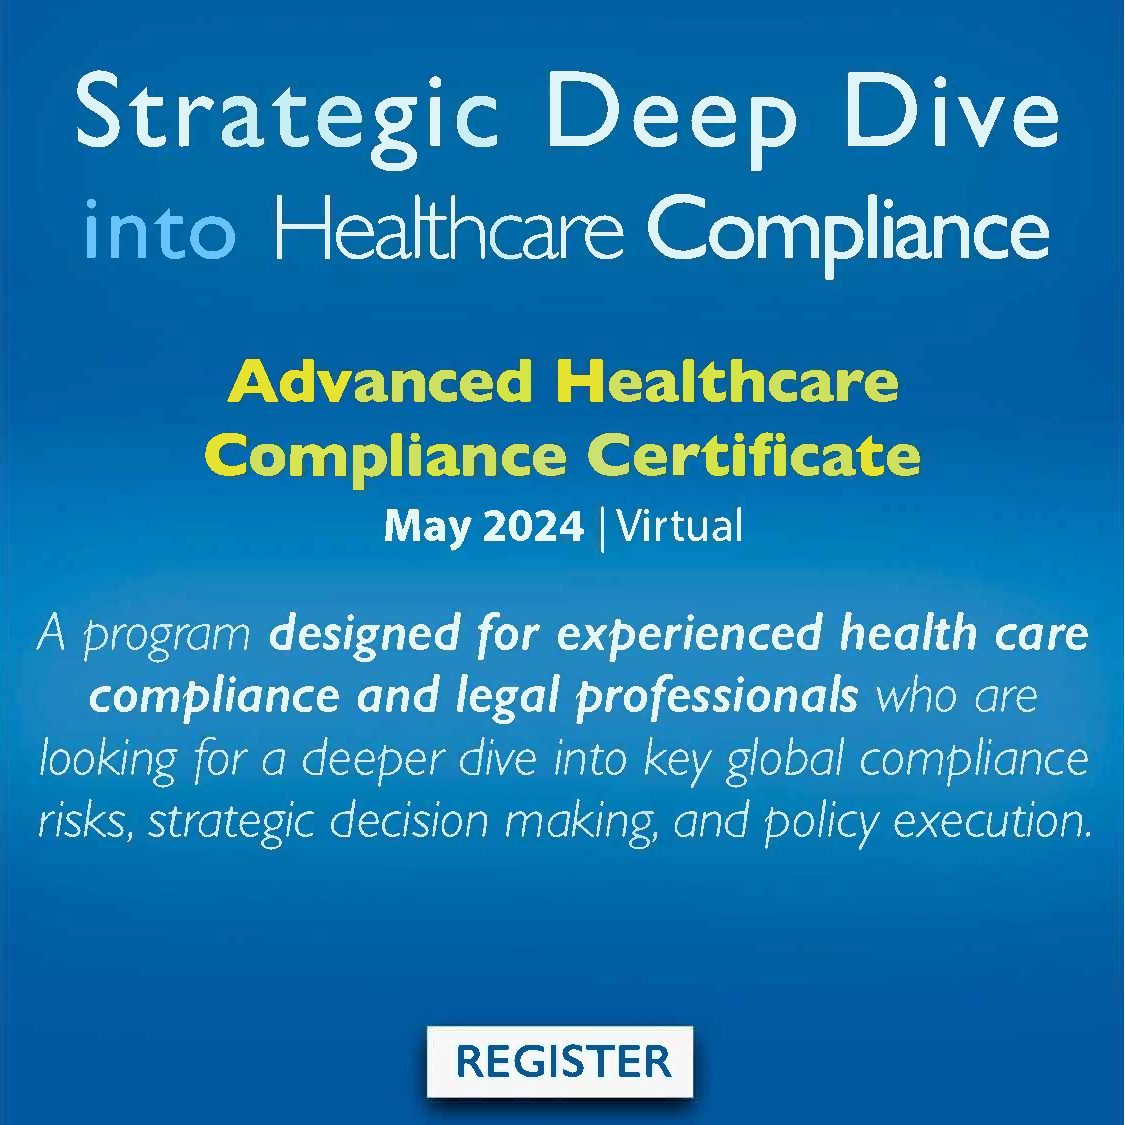 Register for a Deep Dive into Healthcare Compliance in just 3 days!